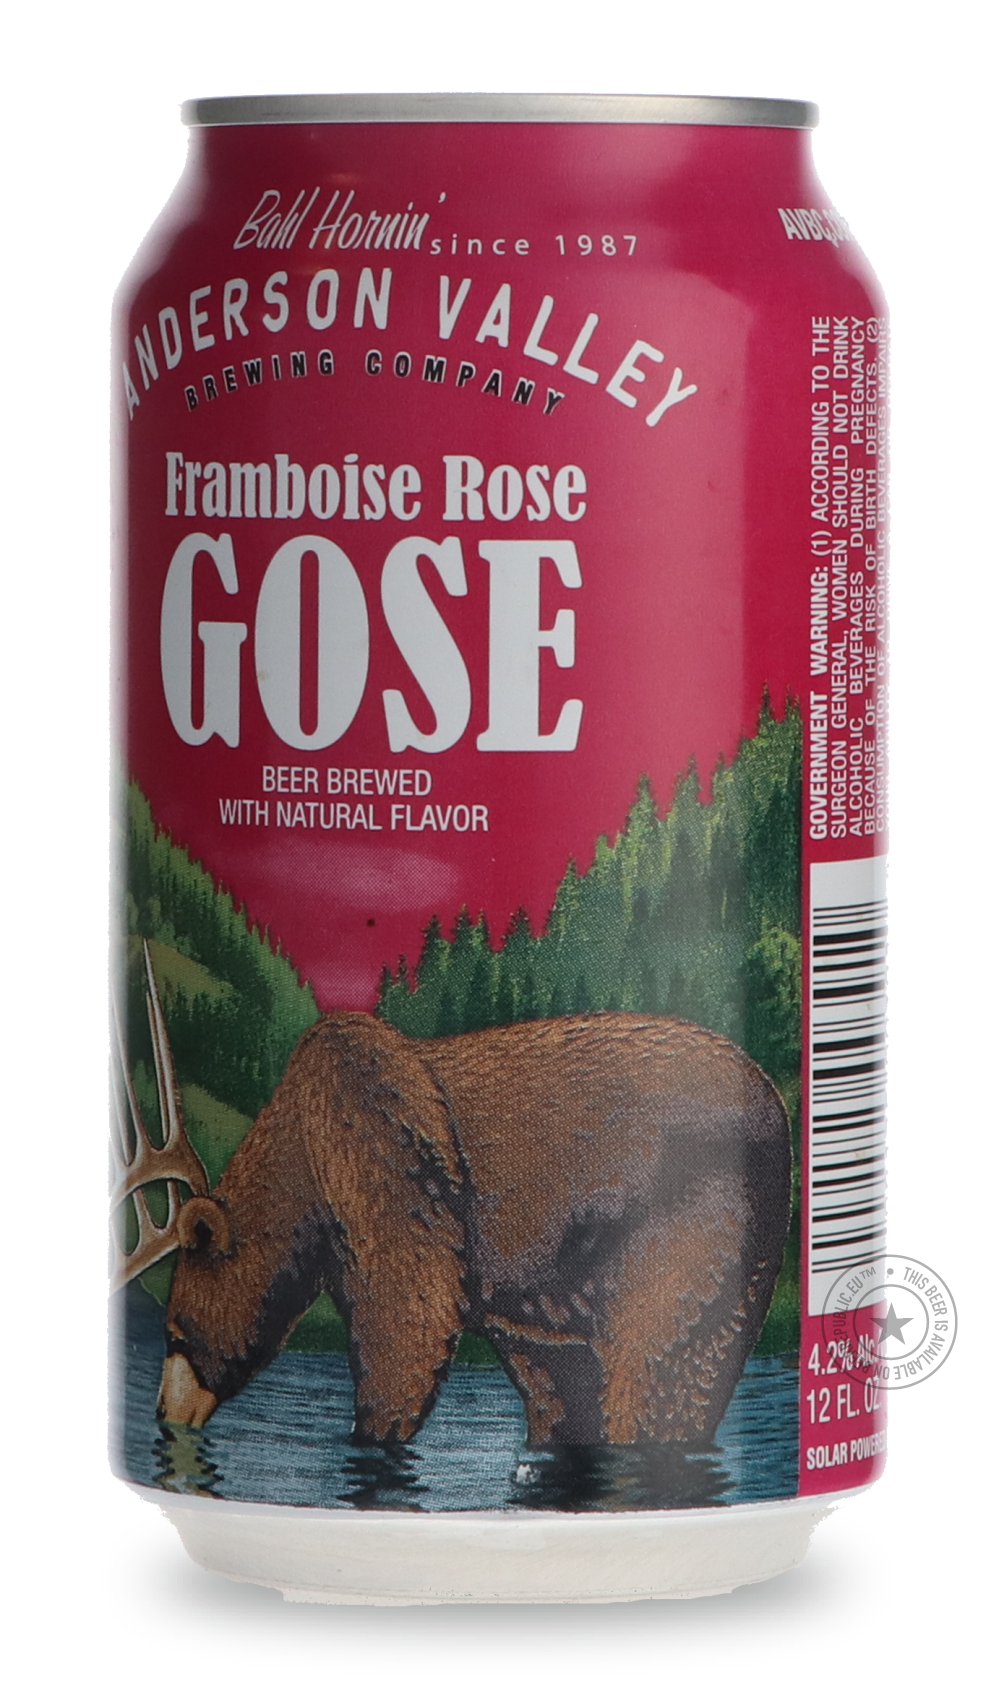 -Anderson Valley- Framboise Rose Gose-Sour / Wild & Fruity- Only @ Beer Republic - The best online beer store for American & Canadian craft beer - Buy beer online from the USA and Canada - Bier online kopen - Amerikaans bier kopen - Craft beer store - Craft beer kopen - Amerikanisch bier kaufen - Bier online kaufen - Acheter biere online - IPA - Stout - Porter - New England IPA - Hazy IPA - Imperial Stout - Barrel Aged - Barrel Aged Imperial Stout - Brown - Dark beer - Blond - Blonde - Pilsner - Lager - Whe